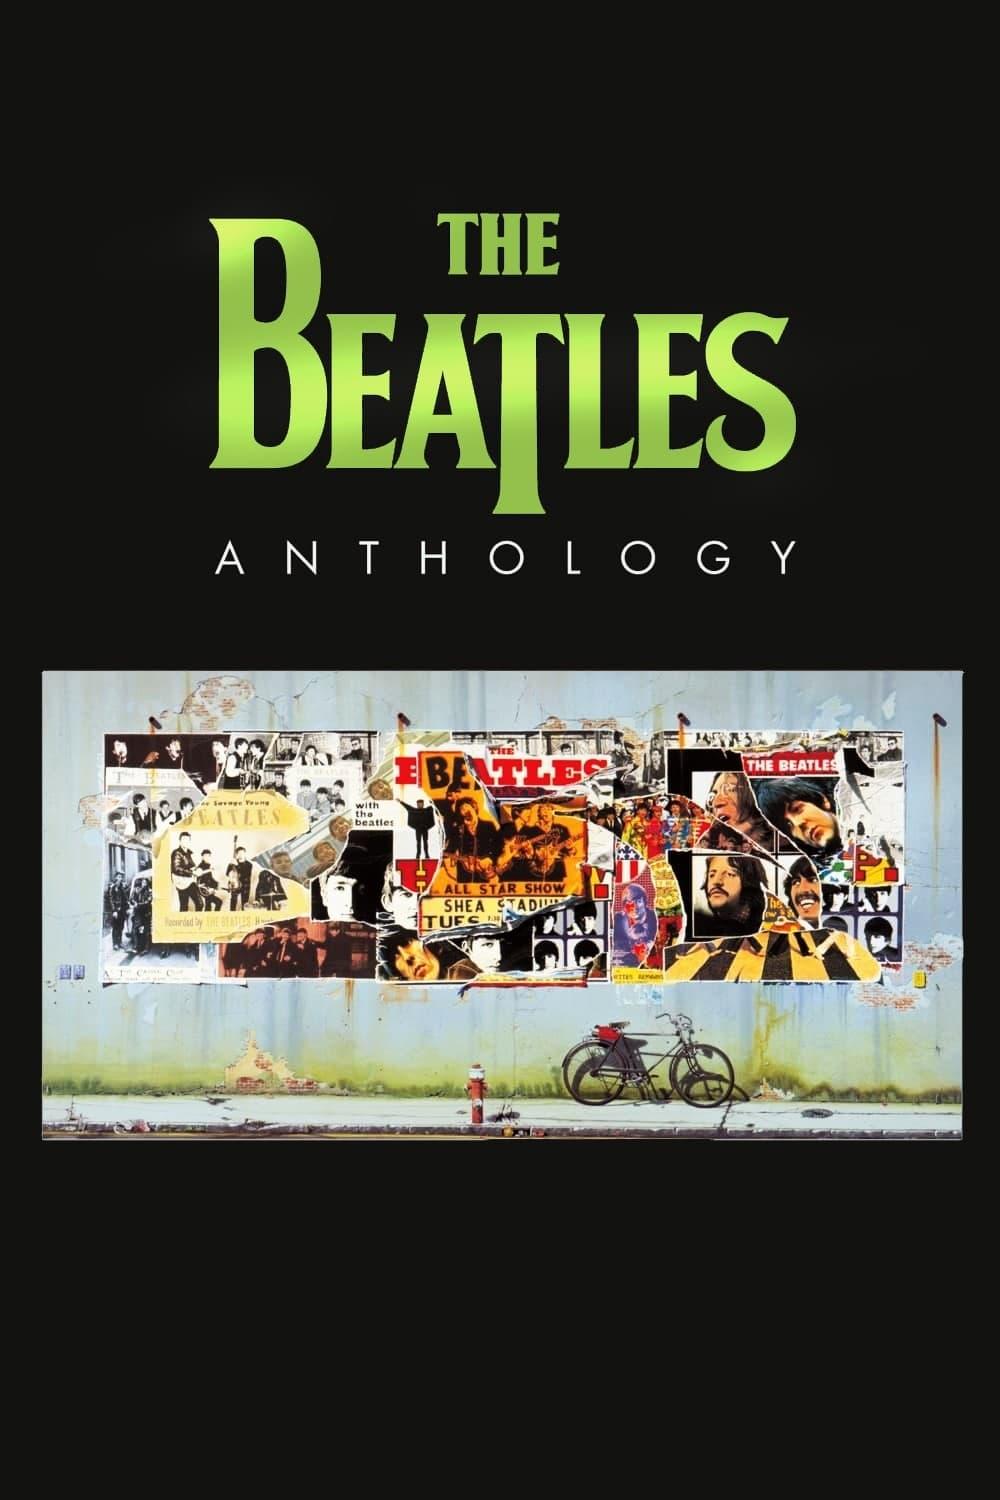 The Beatles Anthology poster